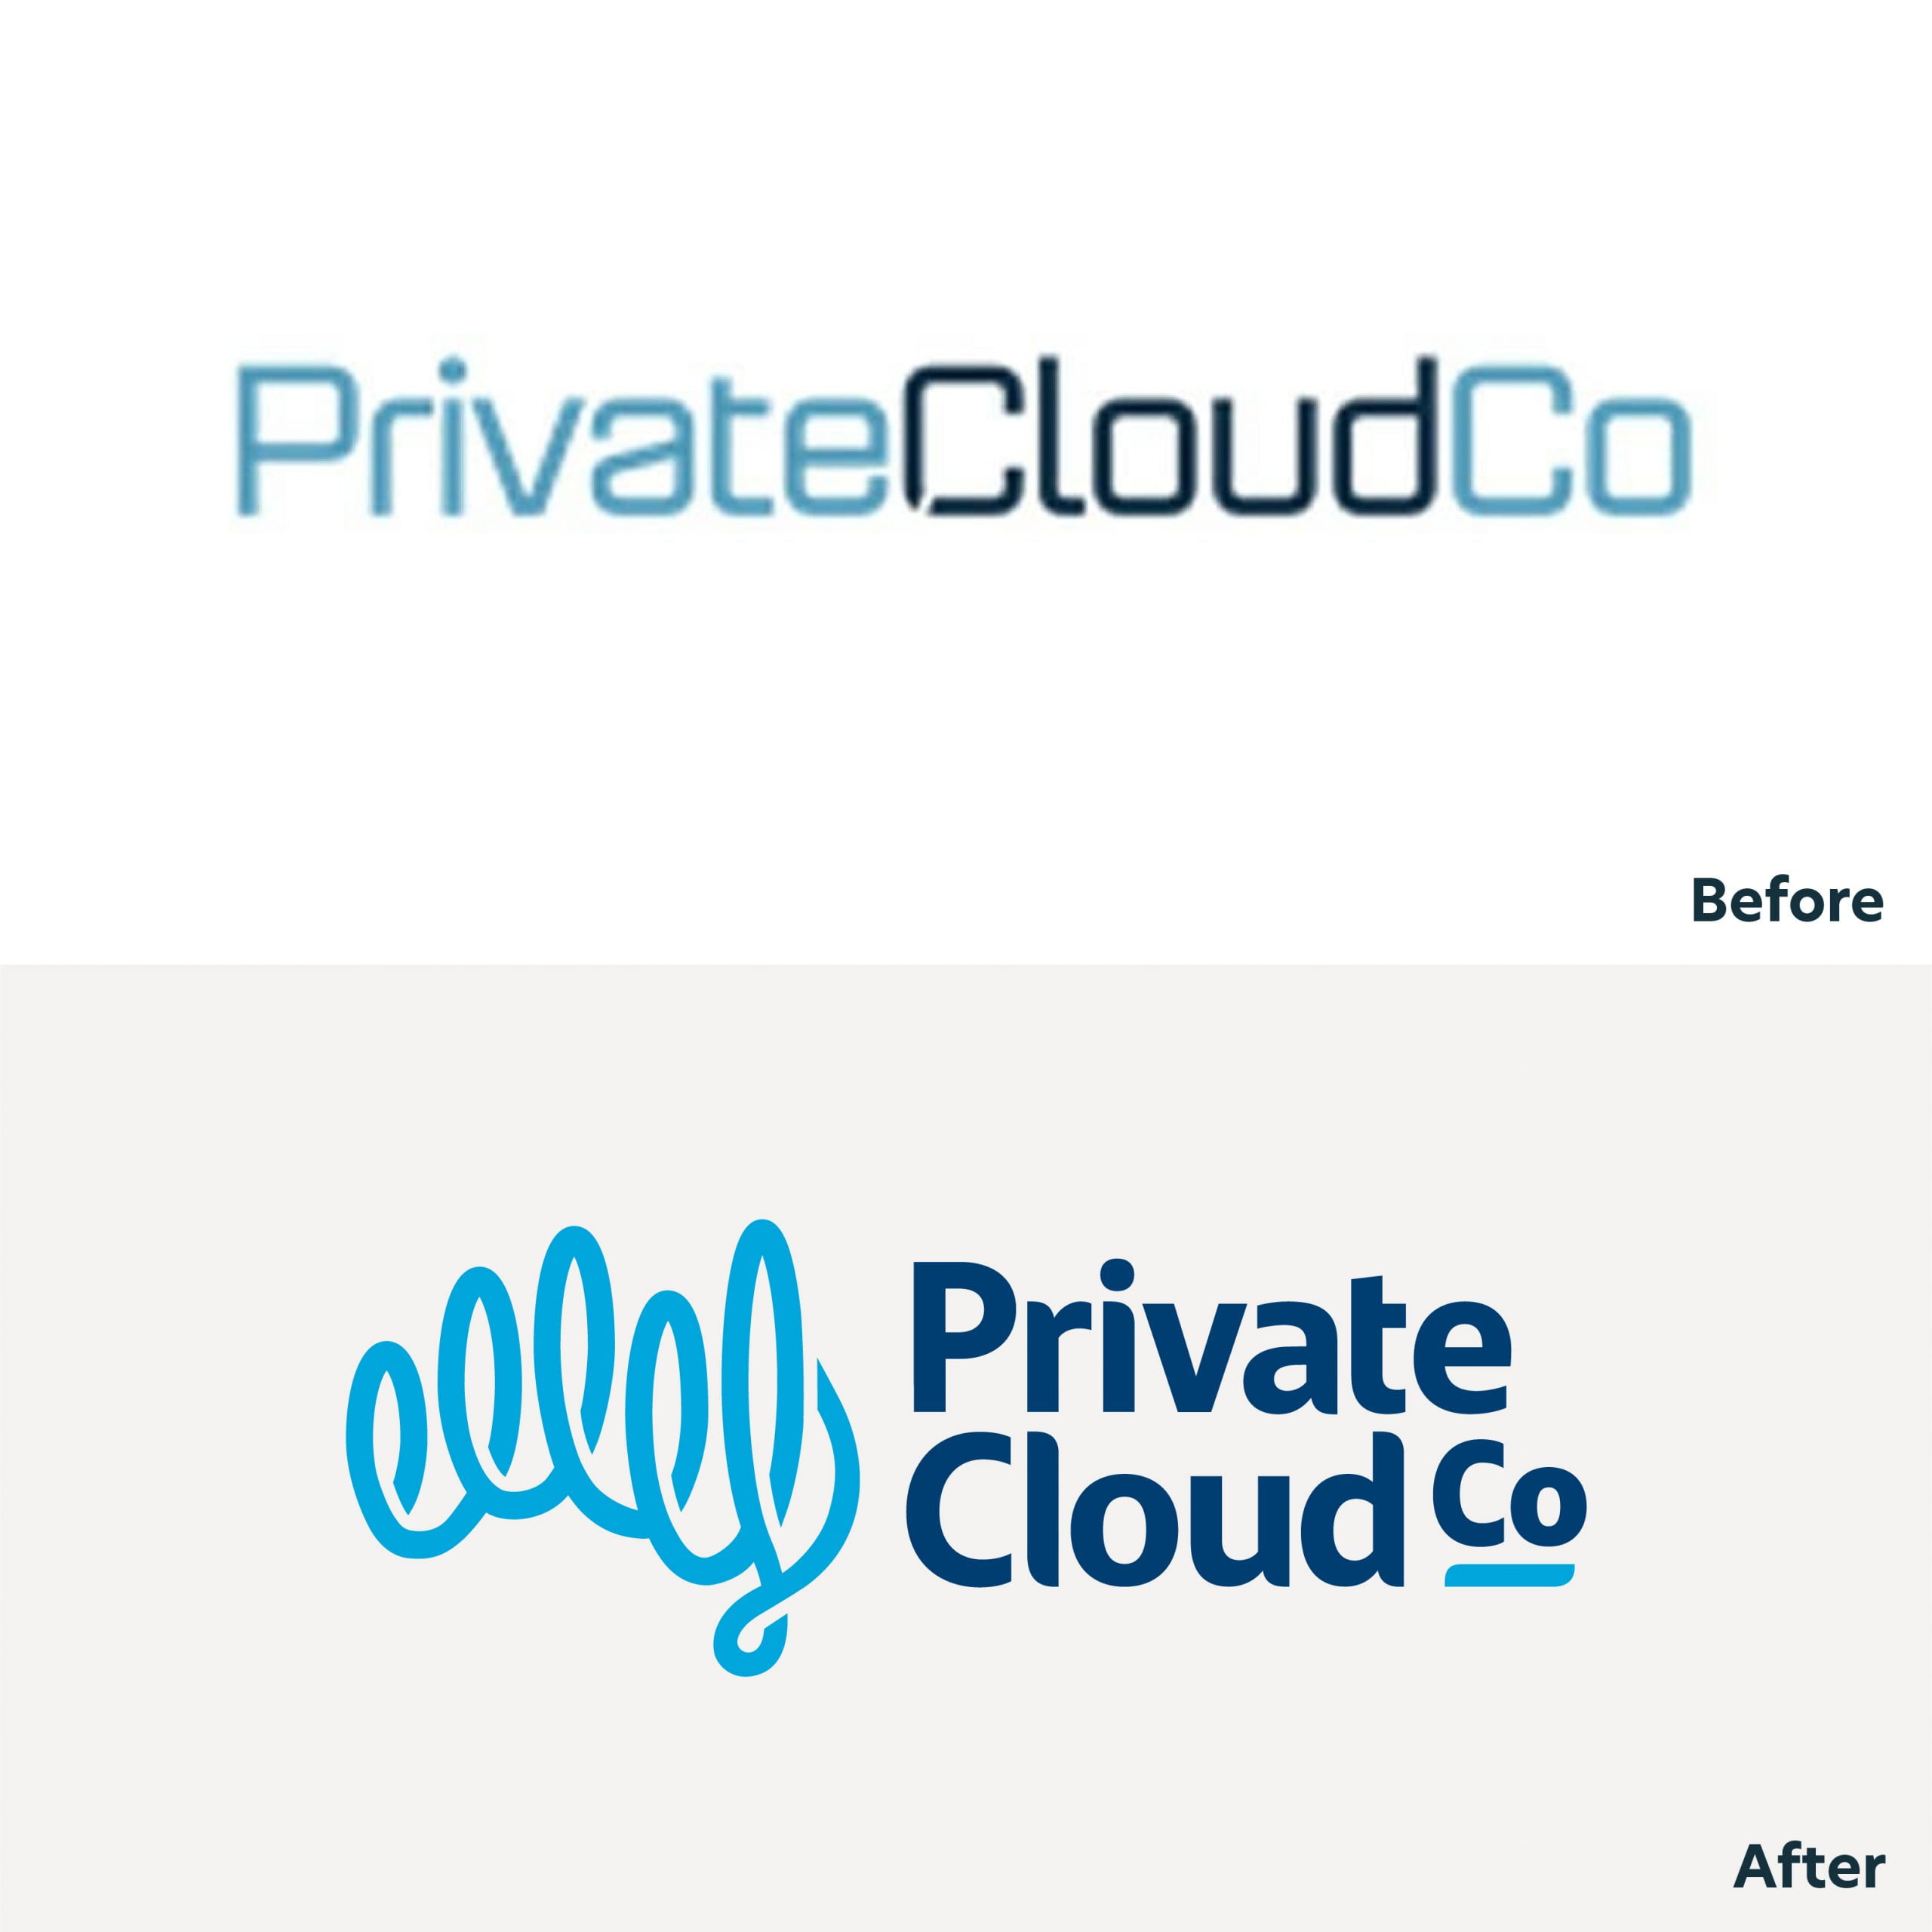 Private Cloud Co Before&After-01